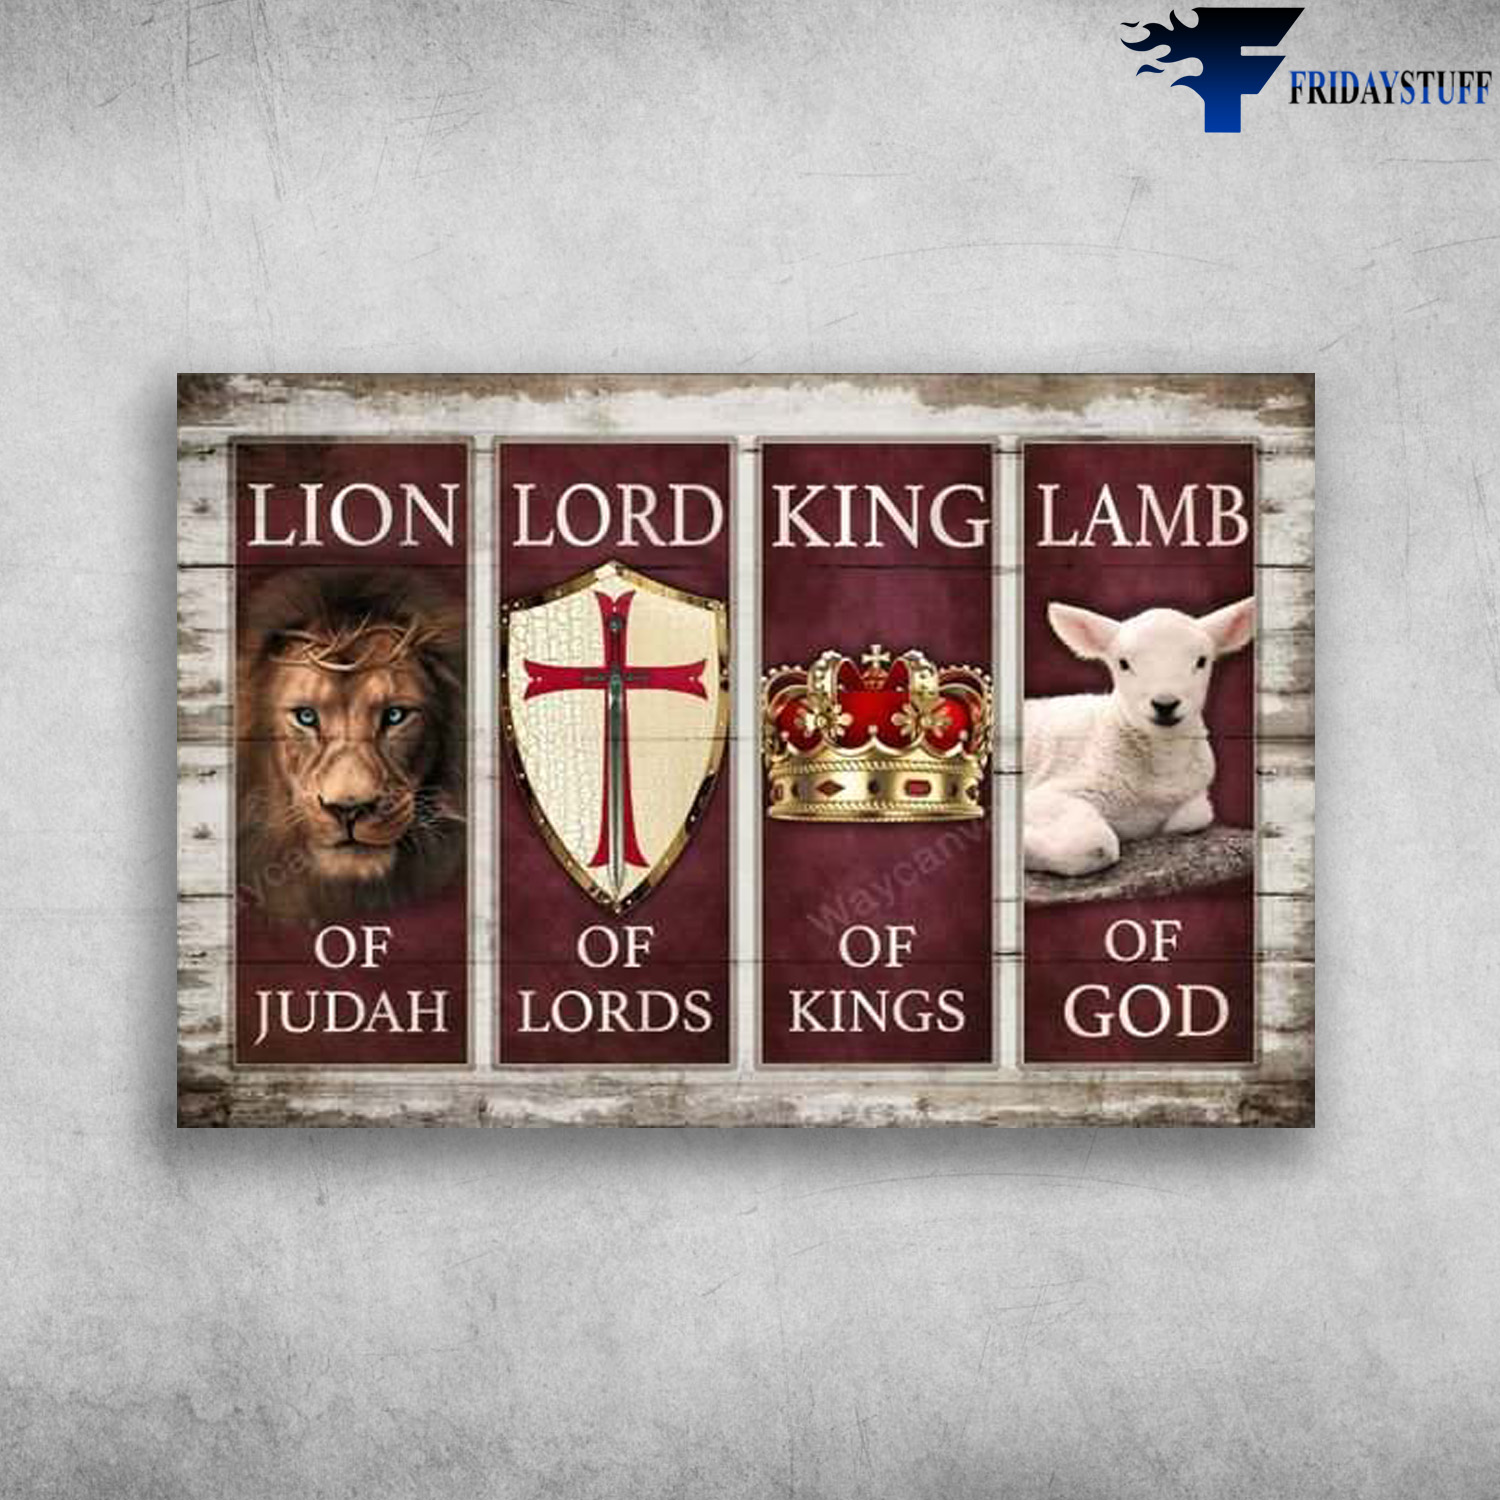 Lion King, Lord Lamb - Lion Of Judah, Lord Of Lords, King Of Kings, Lamb Of God